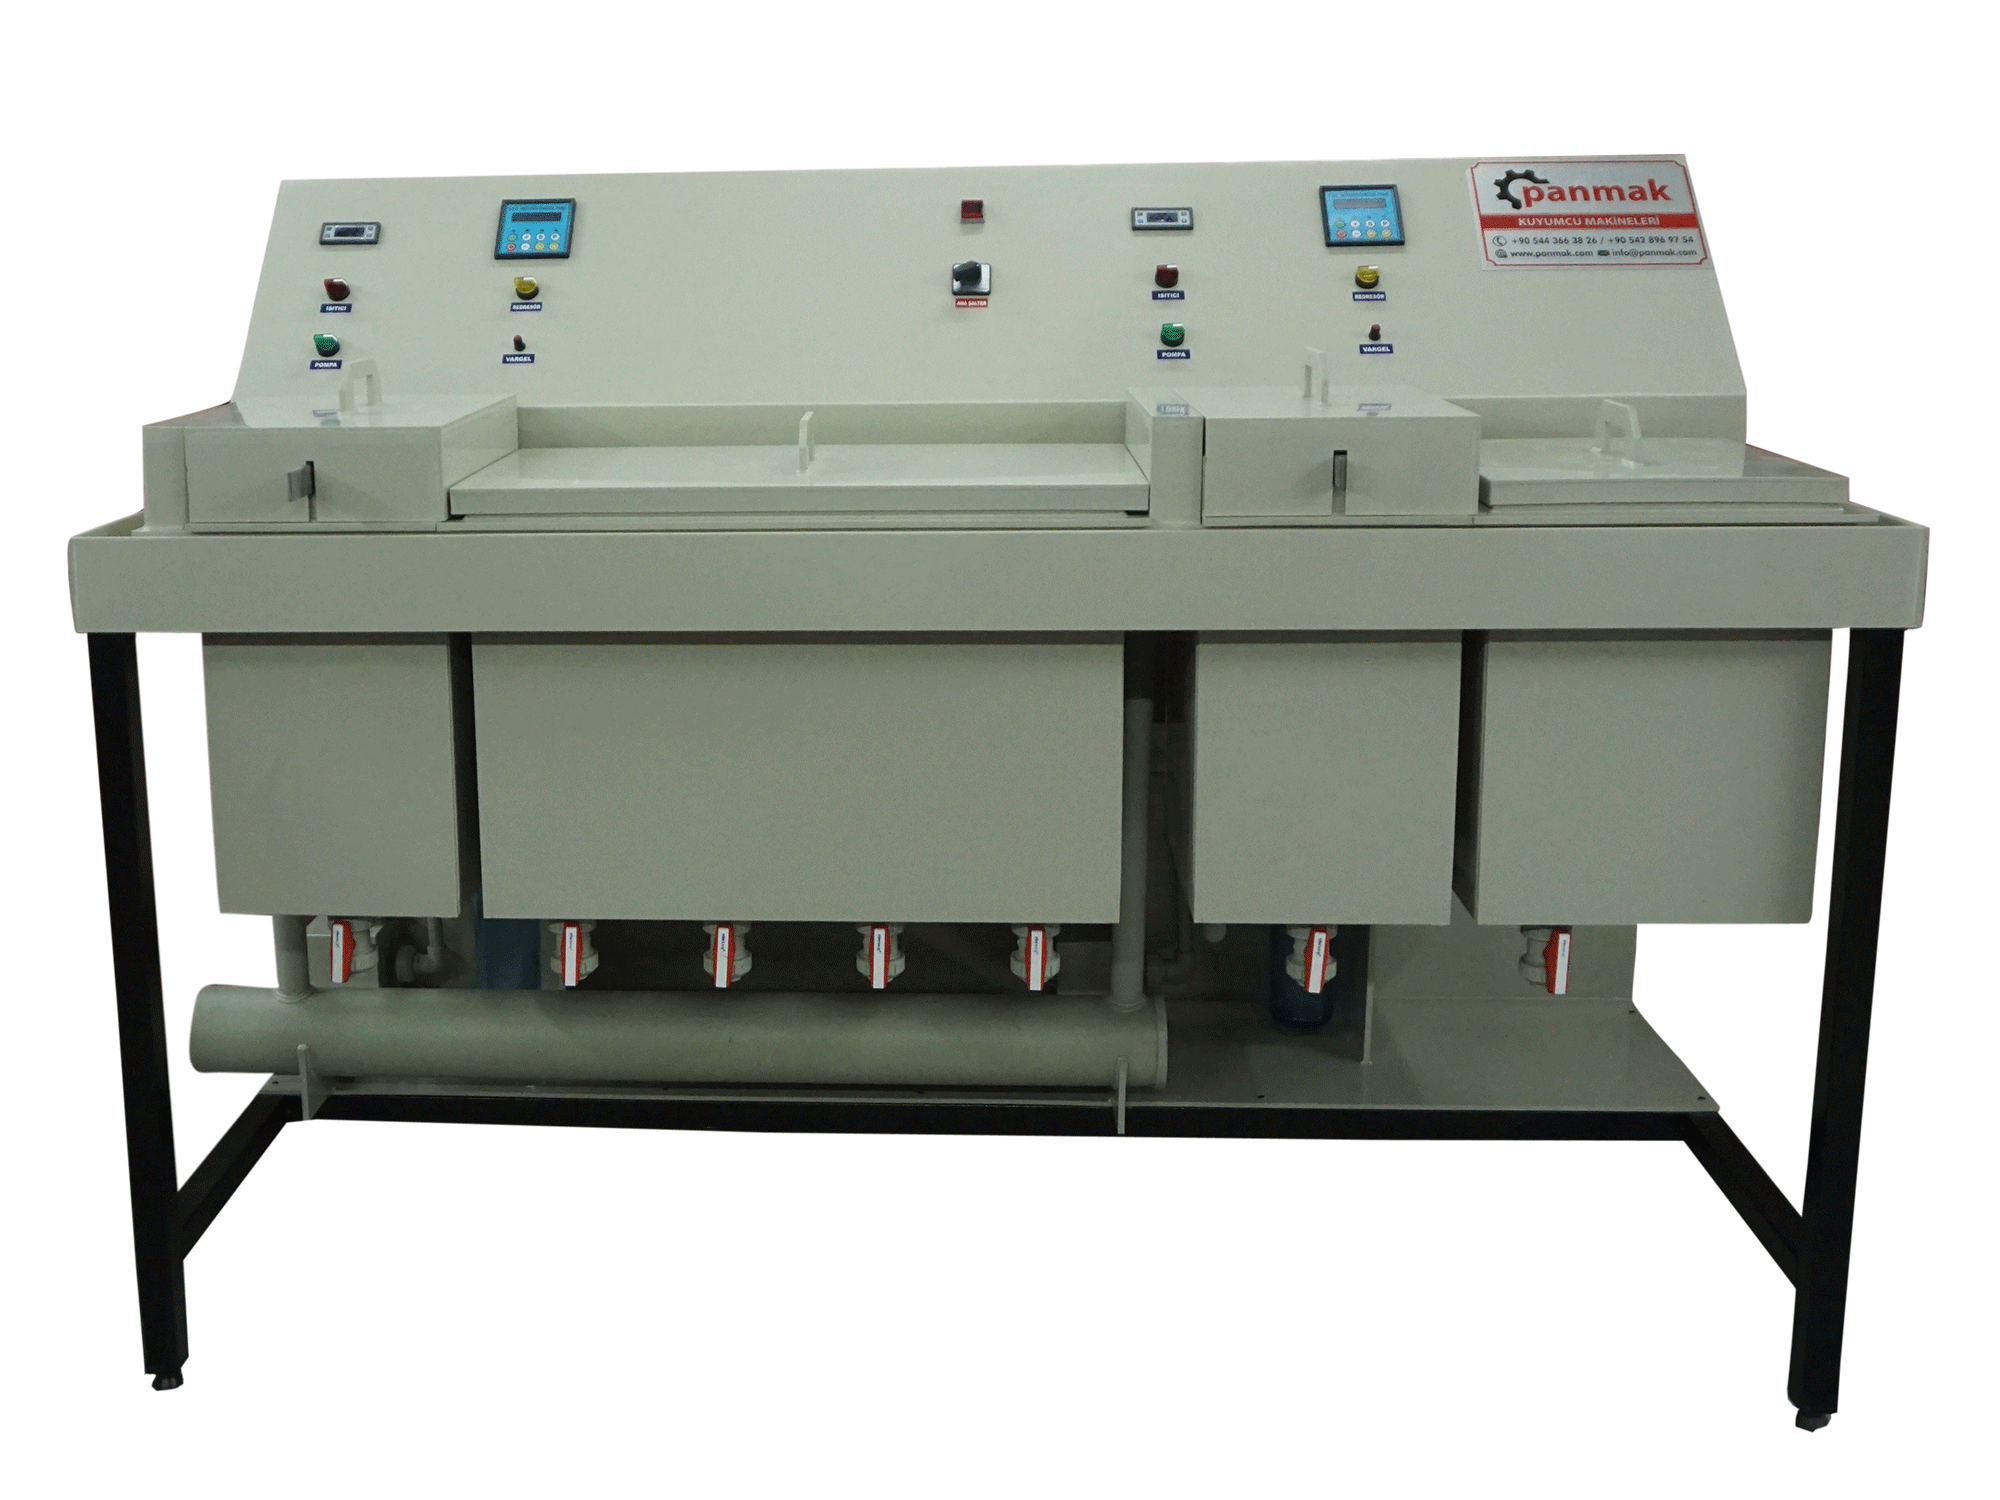 Chemical Surface Treatment Machines